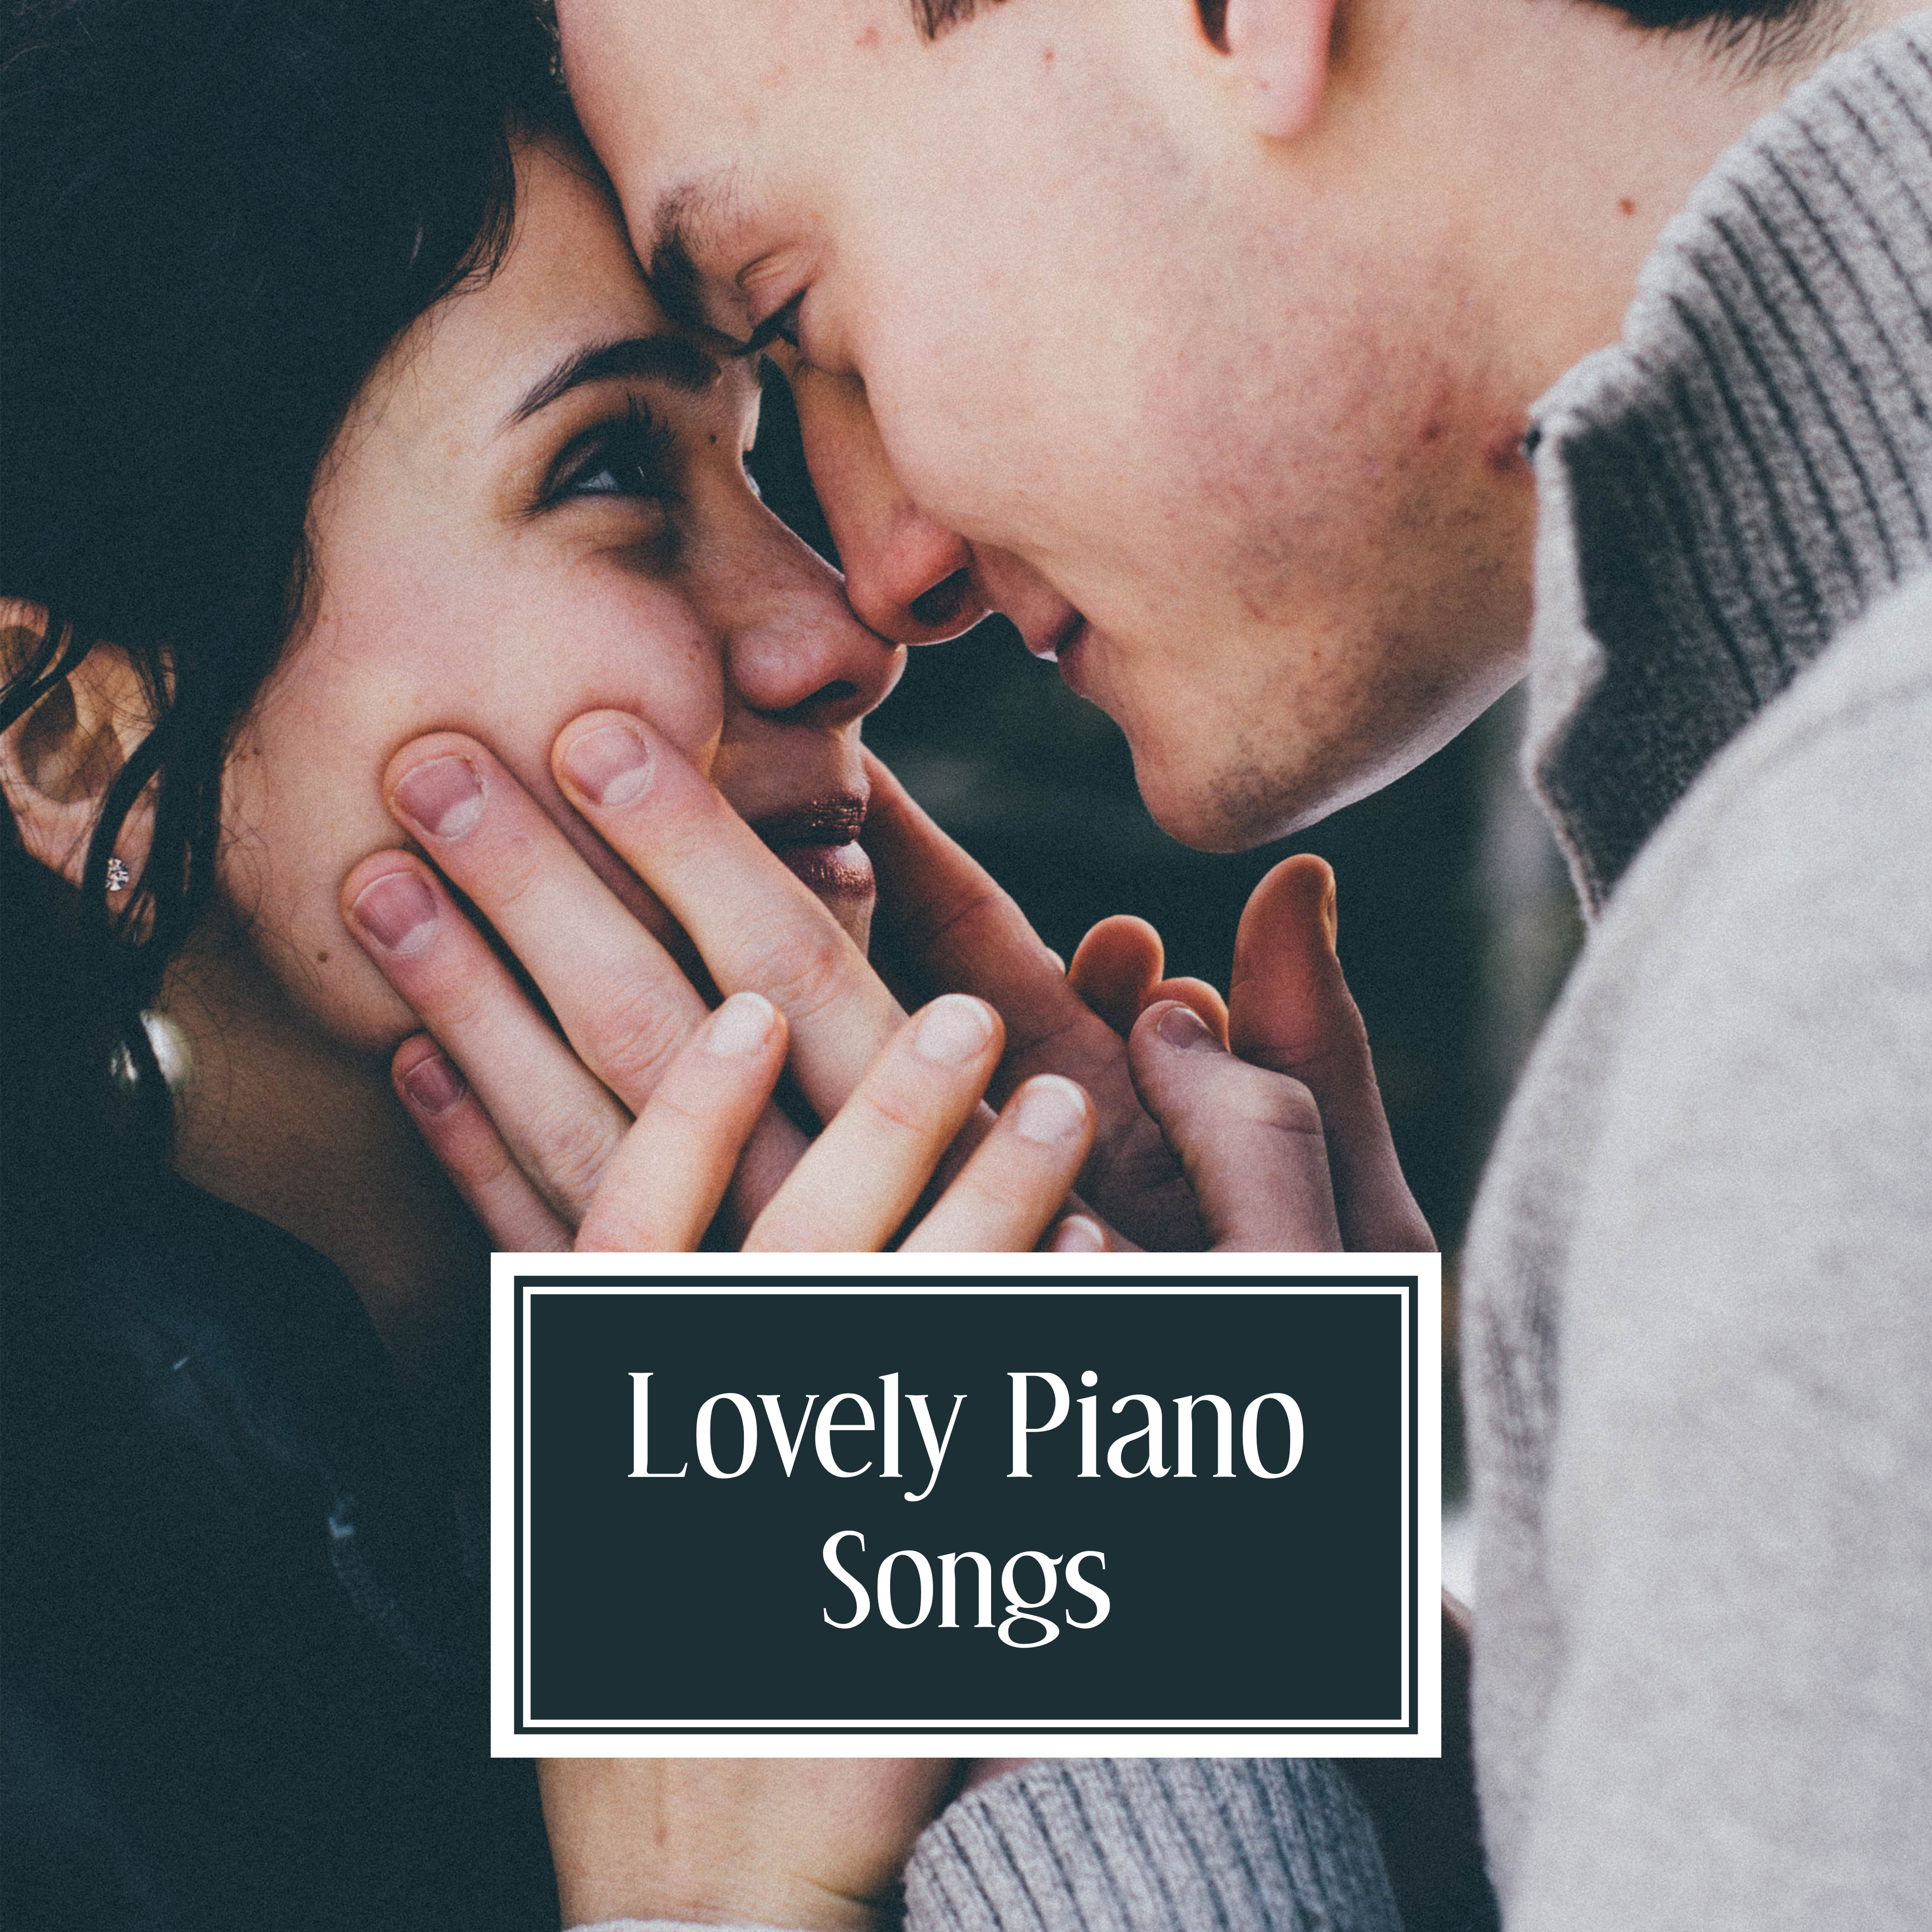 Lovely Piano Songs – Mellow Piano, Jazz Instrumental, Relaxation with Jazz Music, Lounge